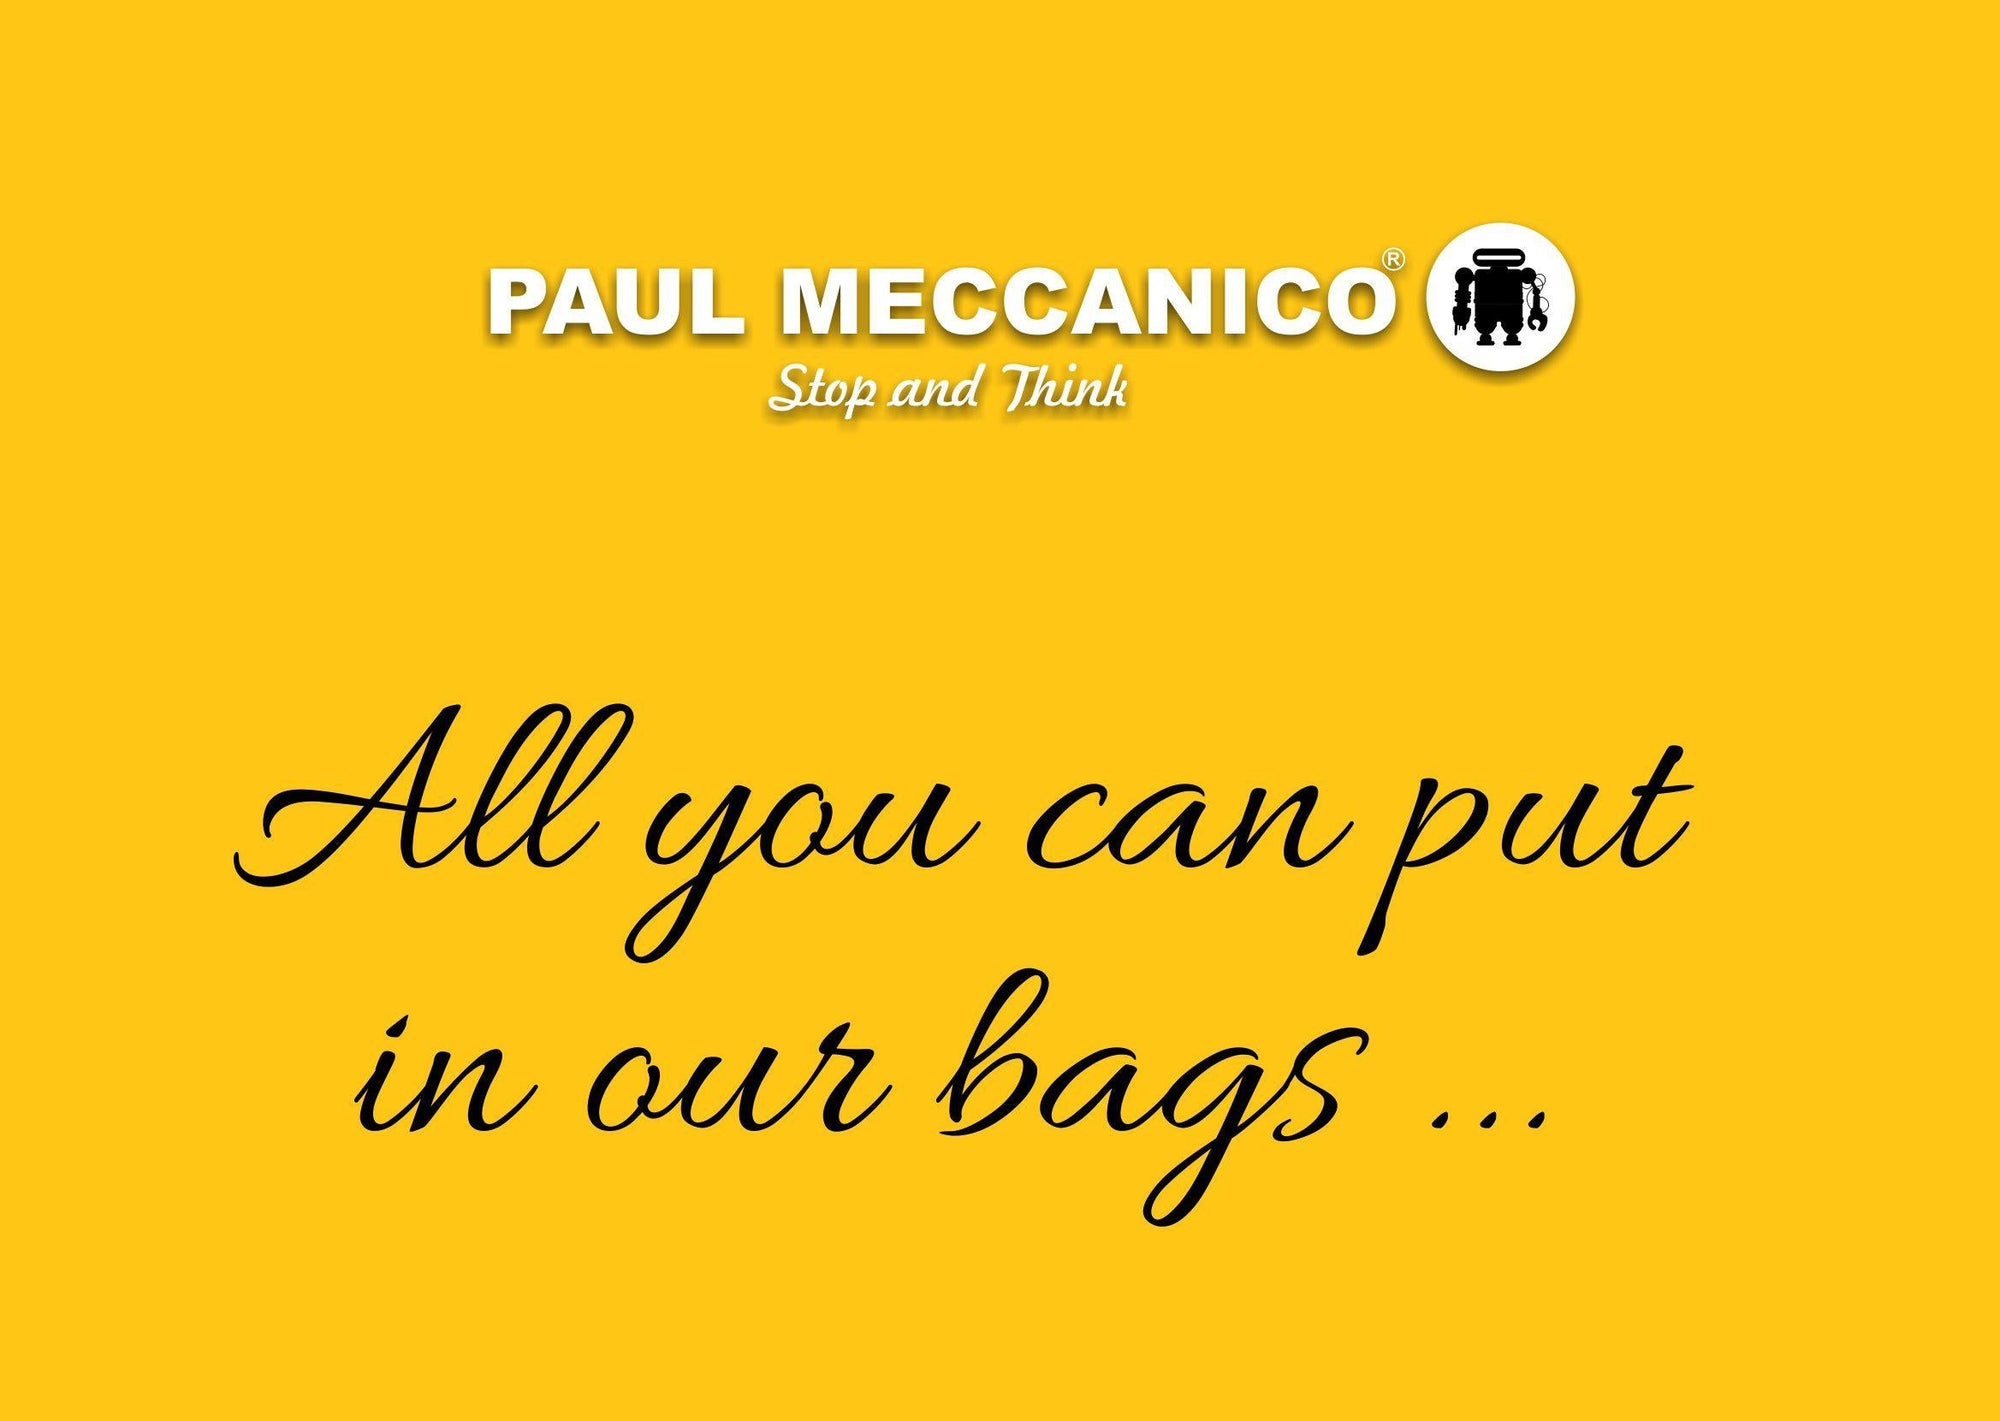 What can you put in our bags ...-Paul Meccanico